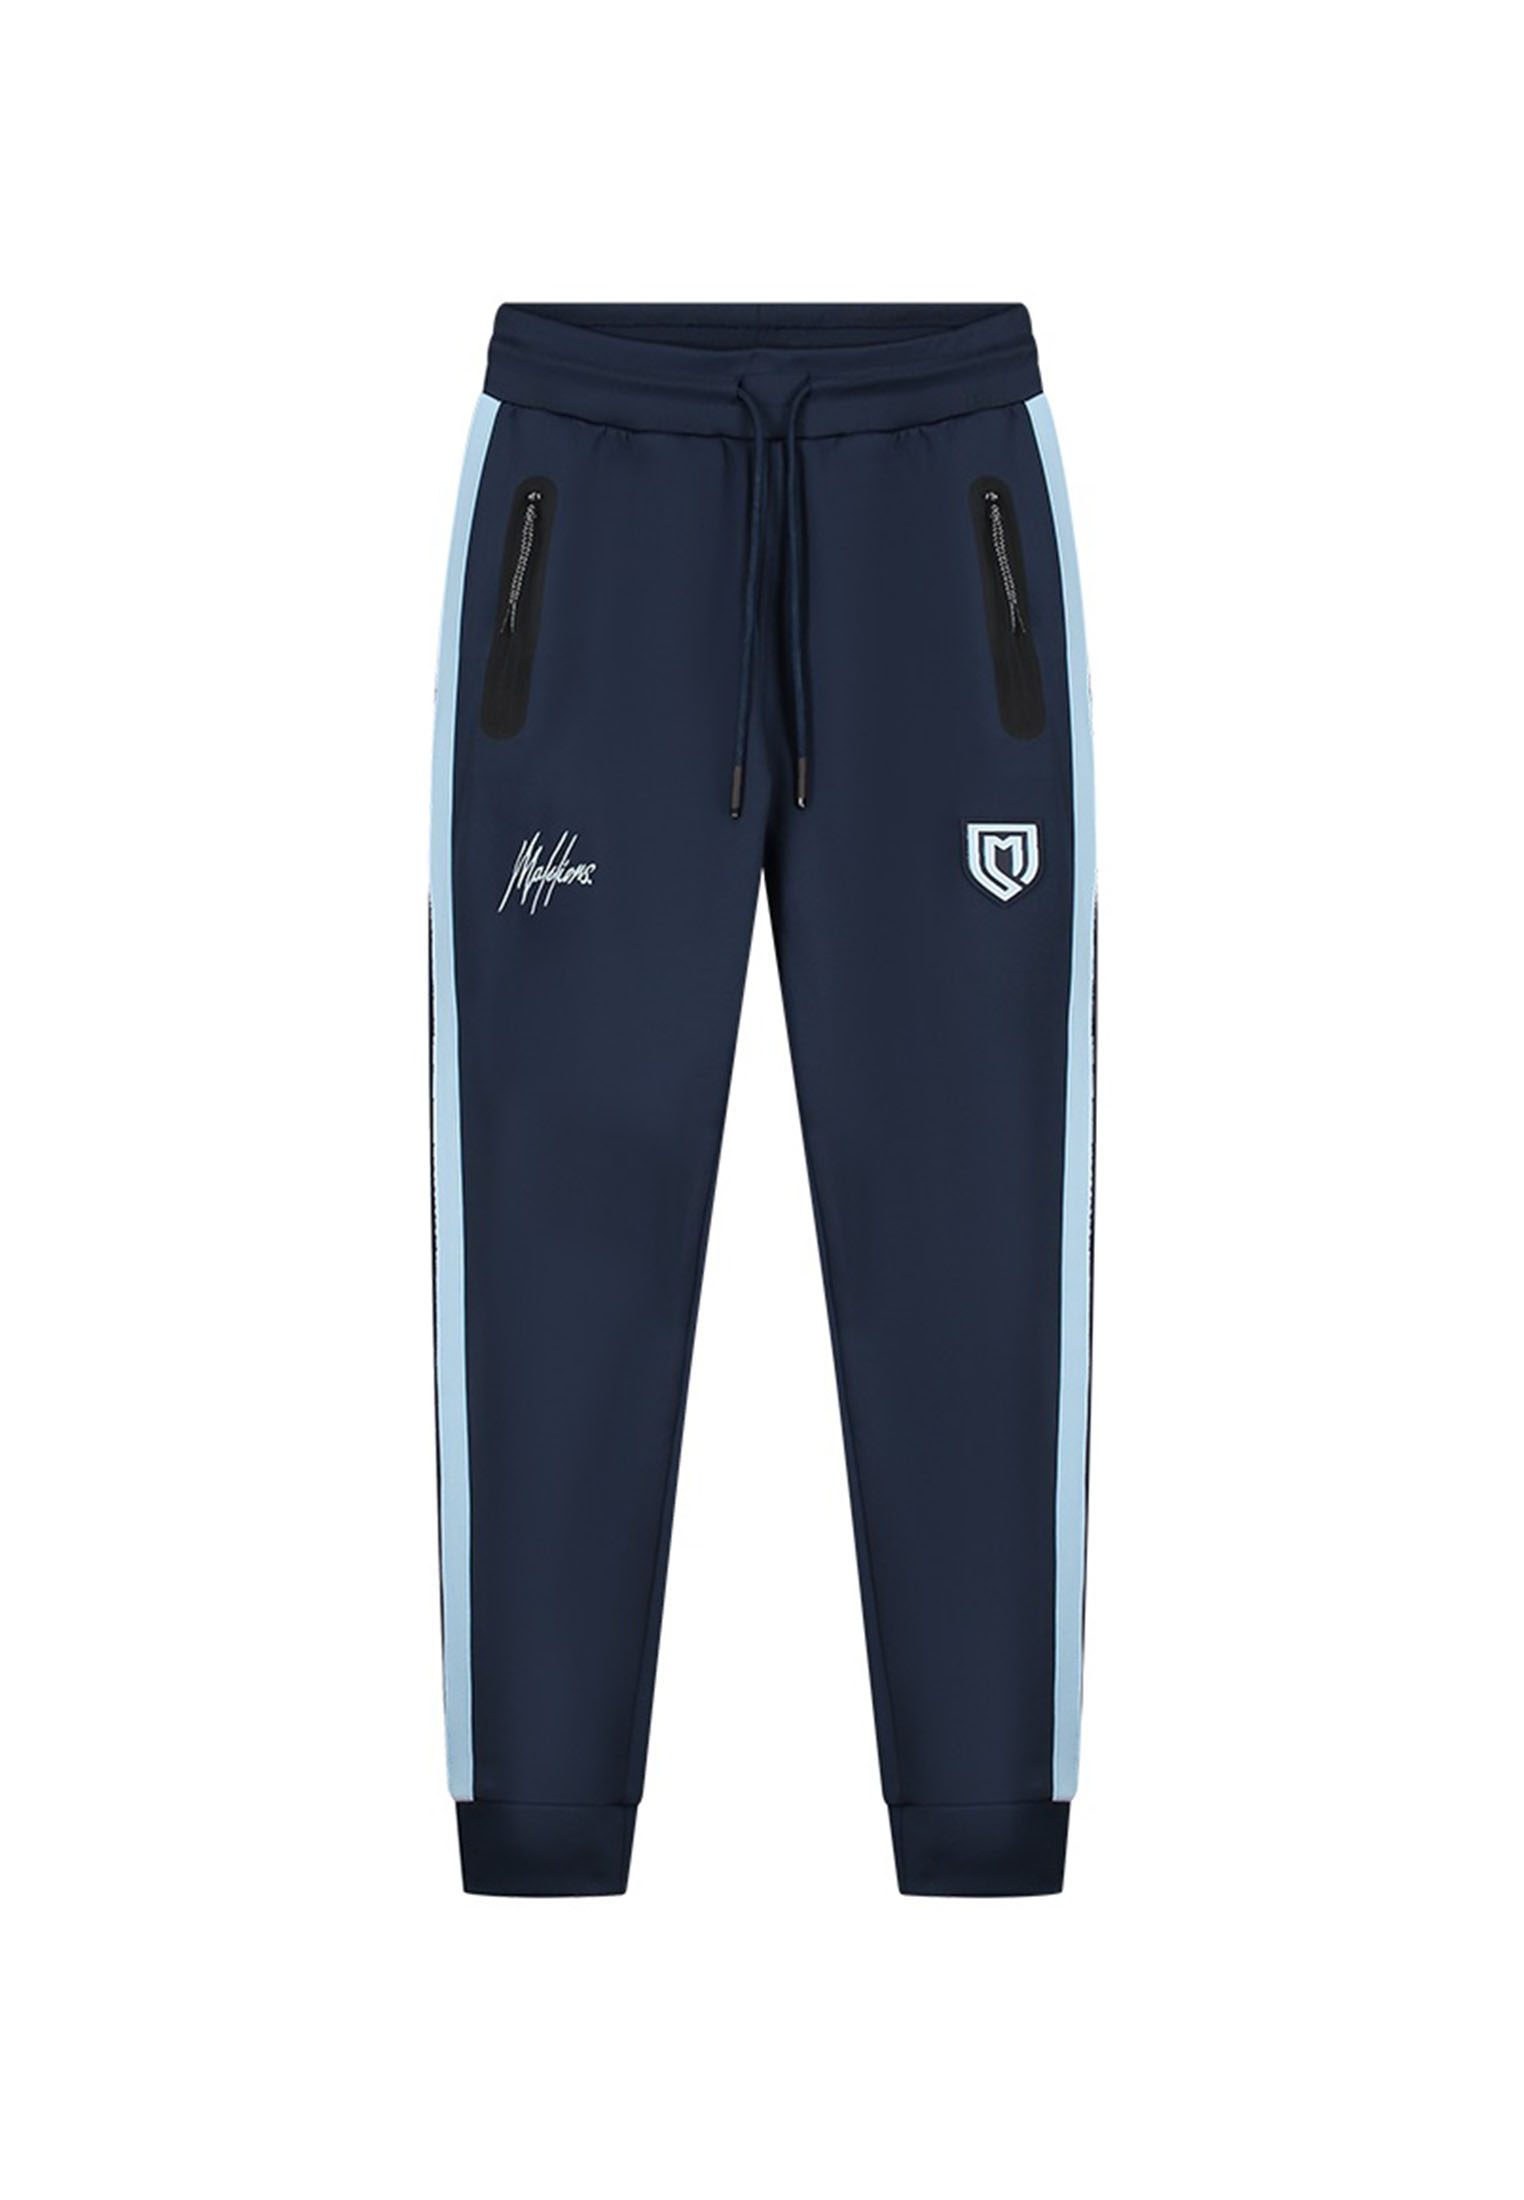 Malelions Sport Academy Trackpants MS2-AW23-17-311 Blauw-M maat M